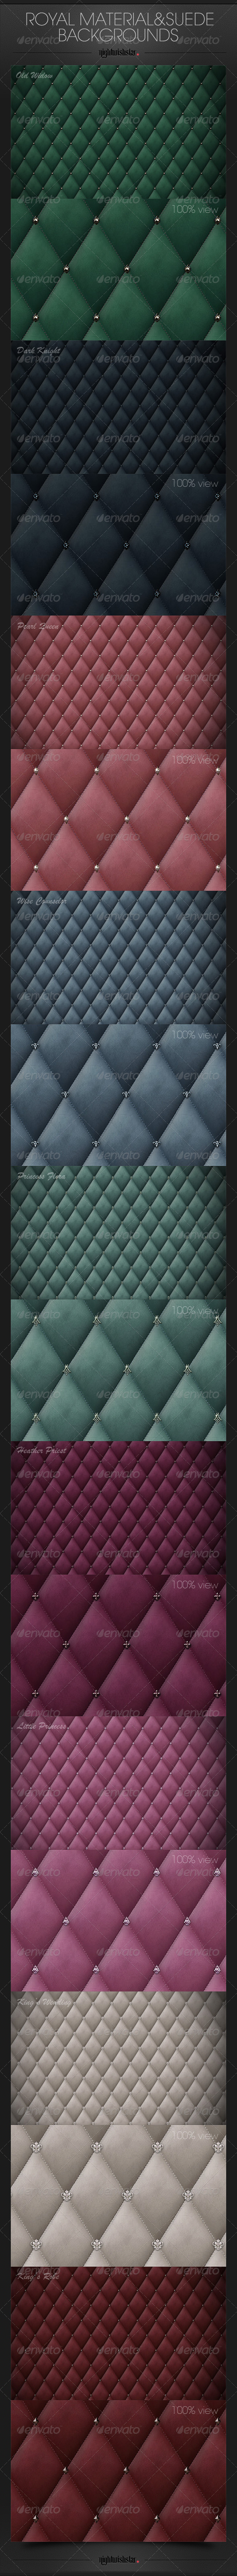 GraphicRiver Royal Material & Suede Backgrounds 6514079